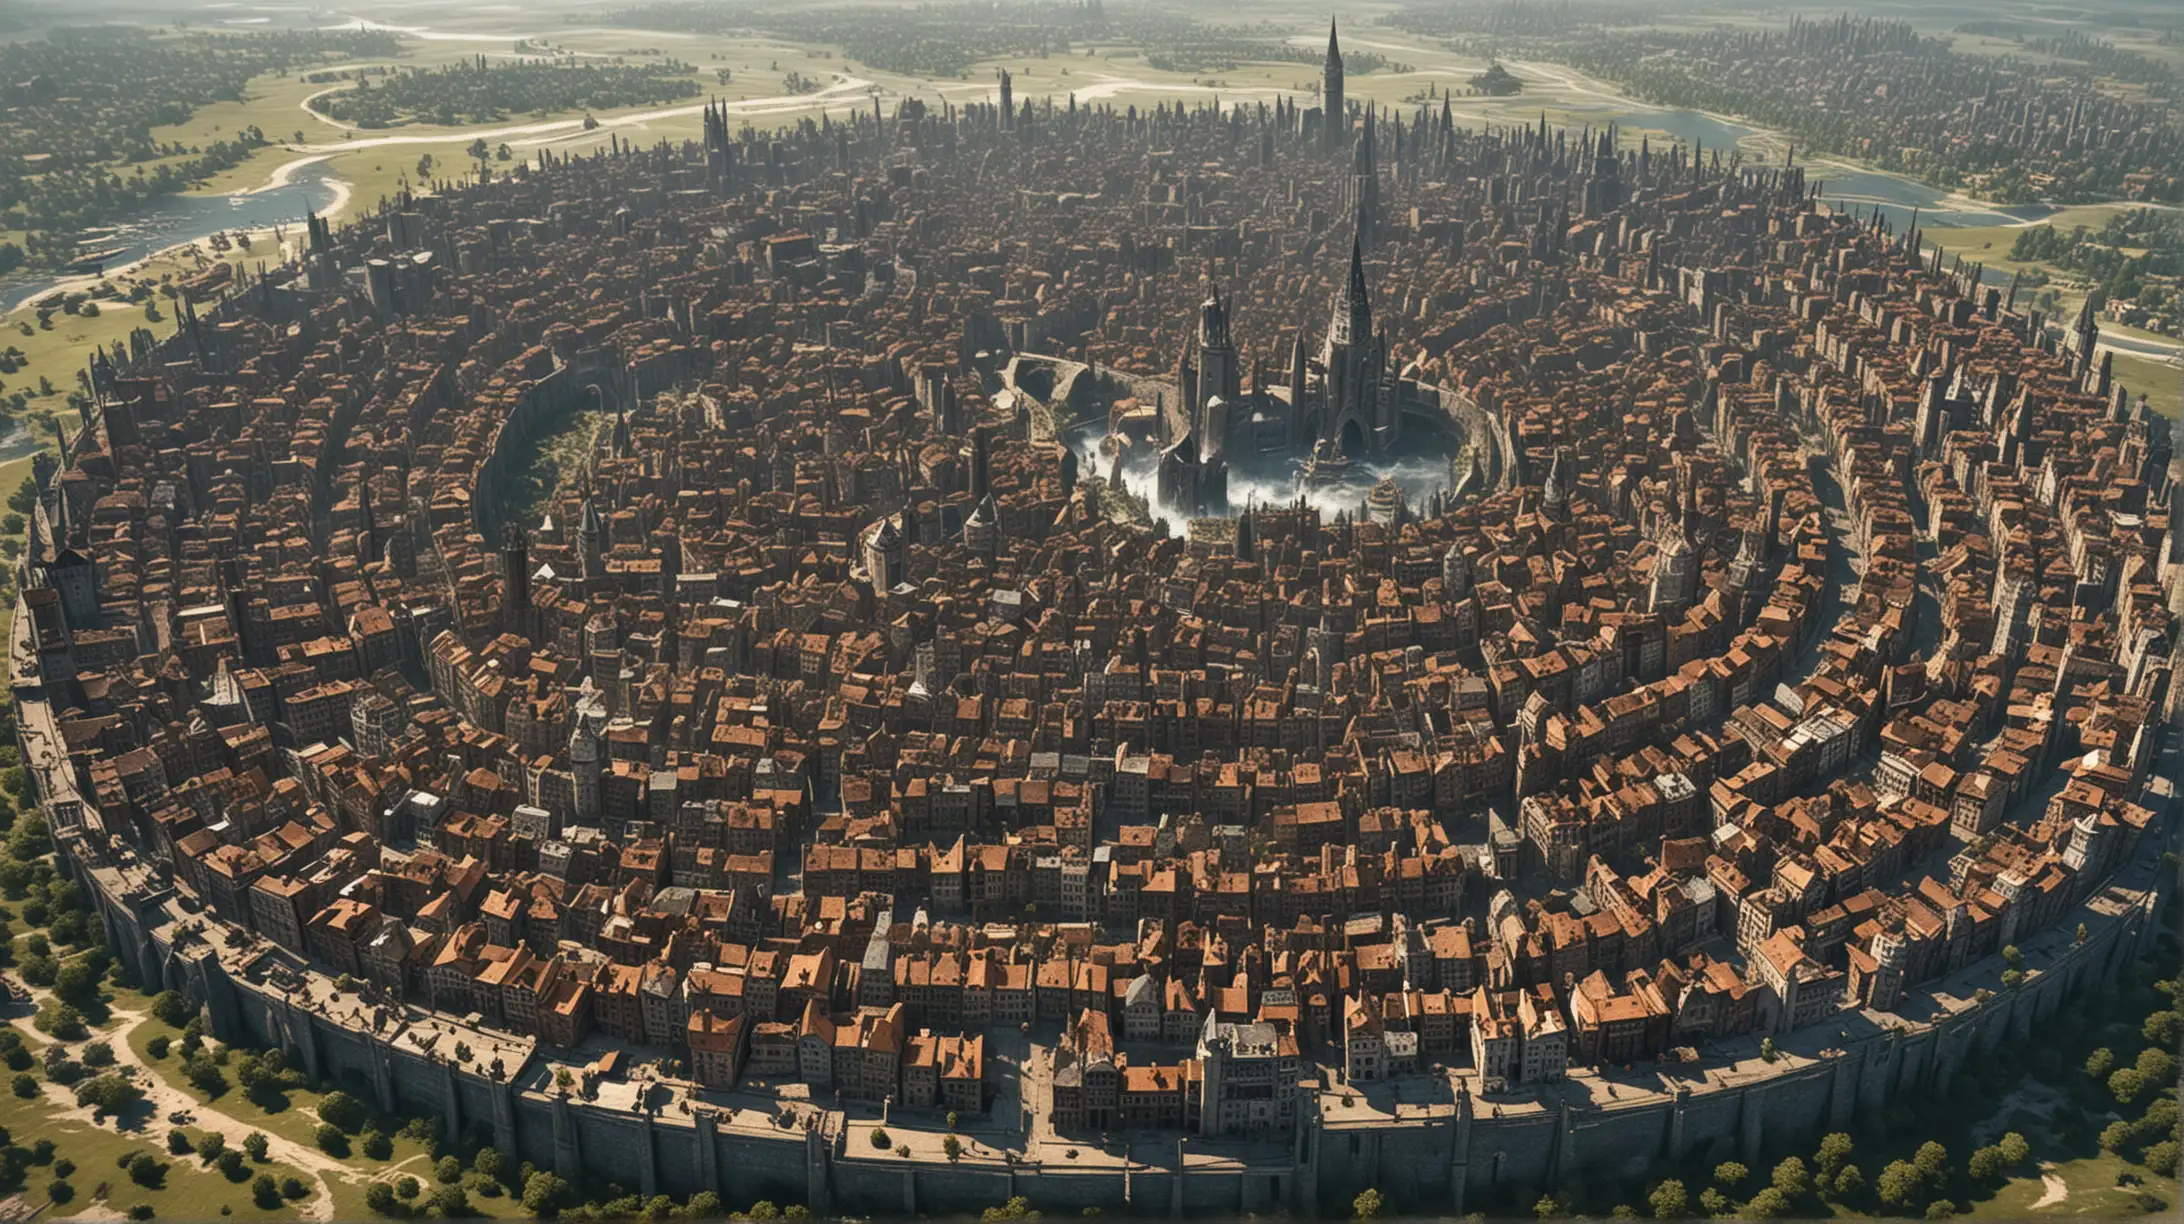 massive circle city, Medieval style , steampunk, epic fantasy, population of 25,000